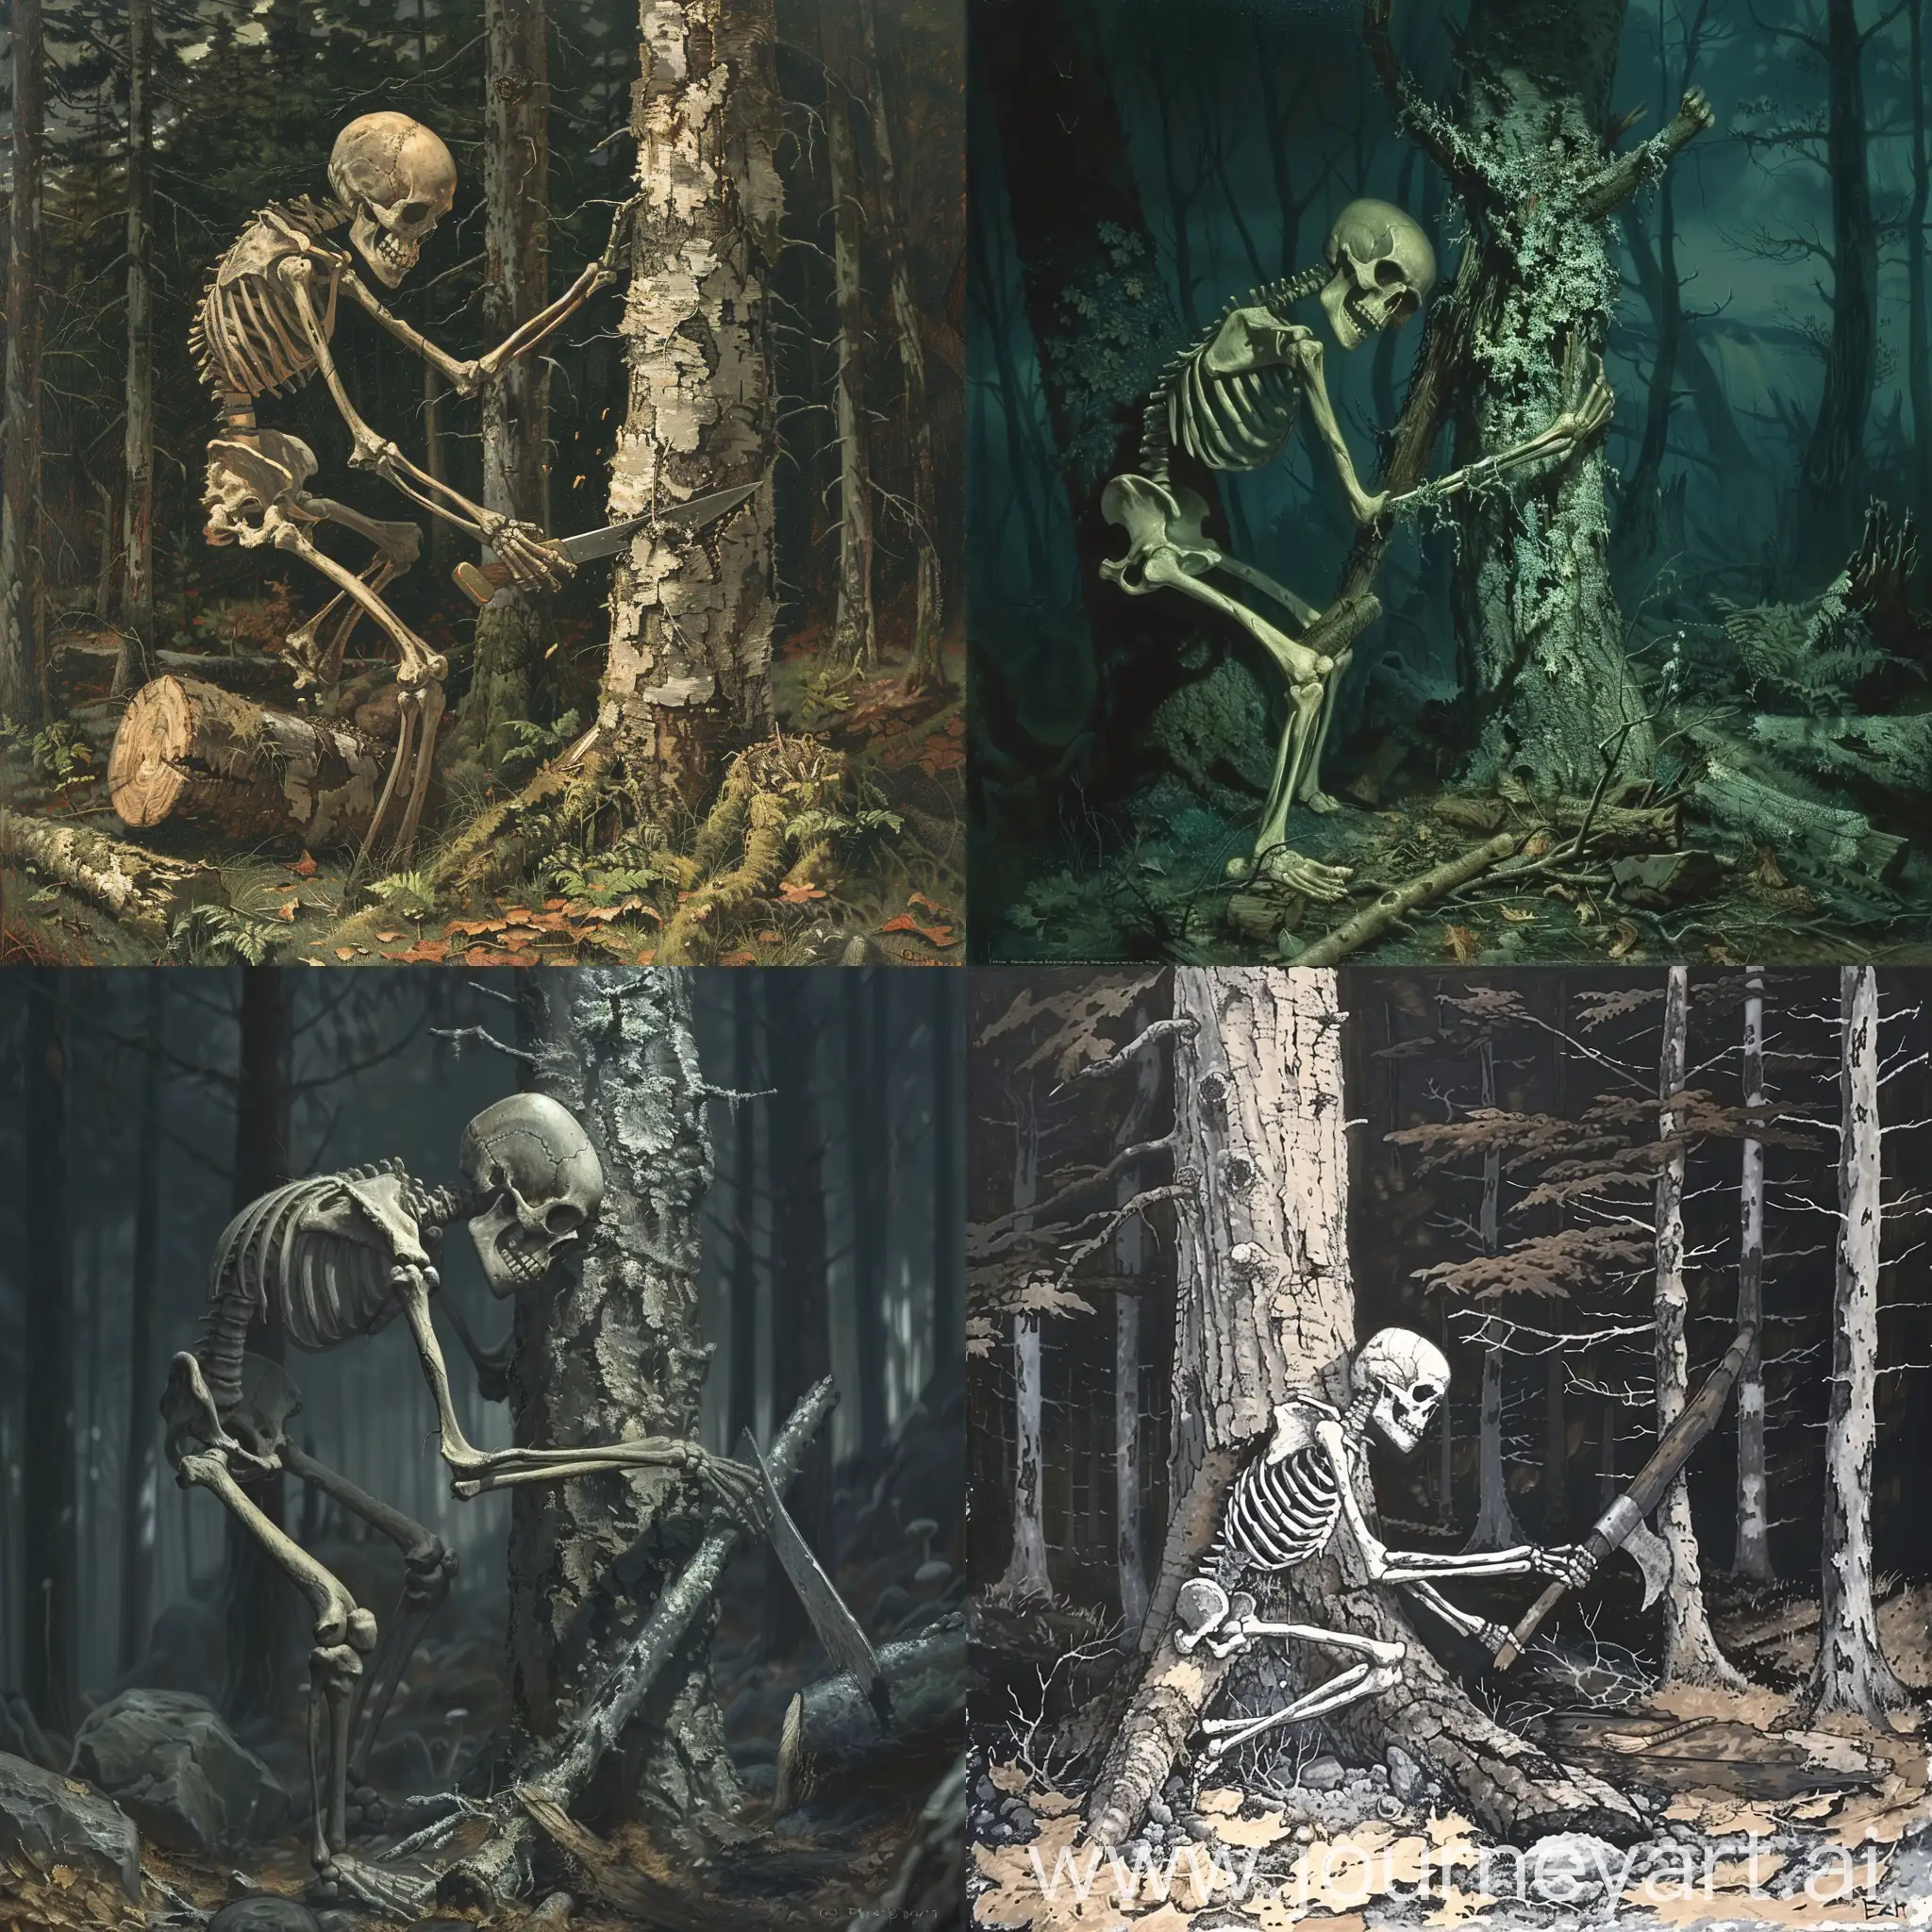 A skeleton is chopping down a tree in the forest